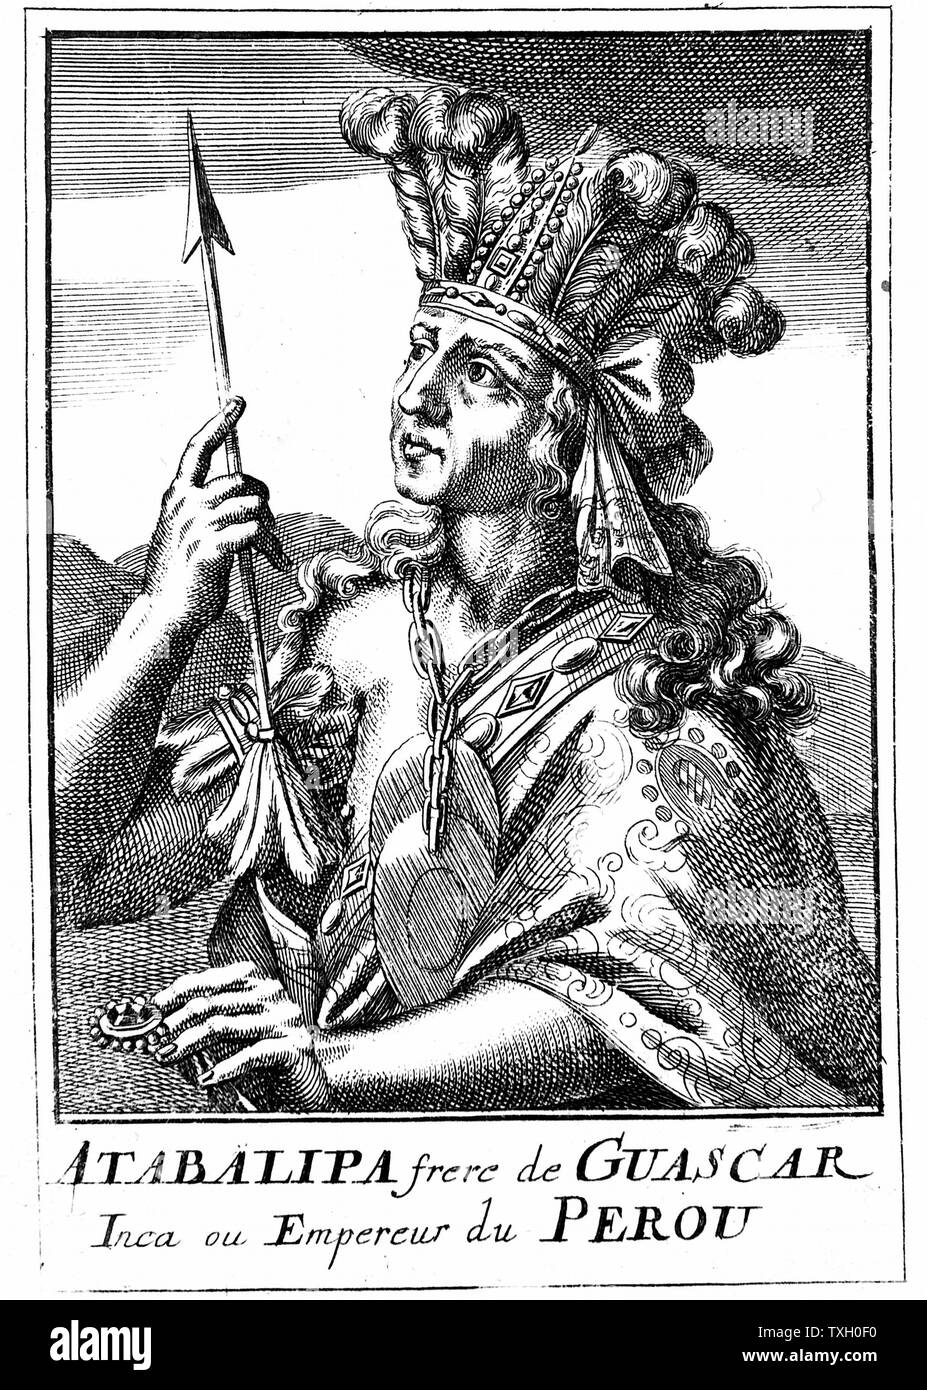 Atahualpa (d1553) last Inca emperor of Peru. Captured by Pizarro who, after extorting huge ransom, put him to death for heresy (against Christianity). Copperplate engraving, 1686 Stock Photo